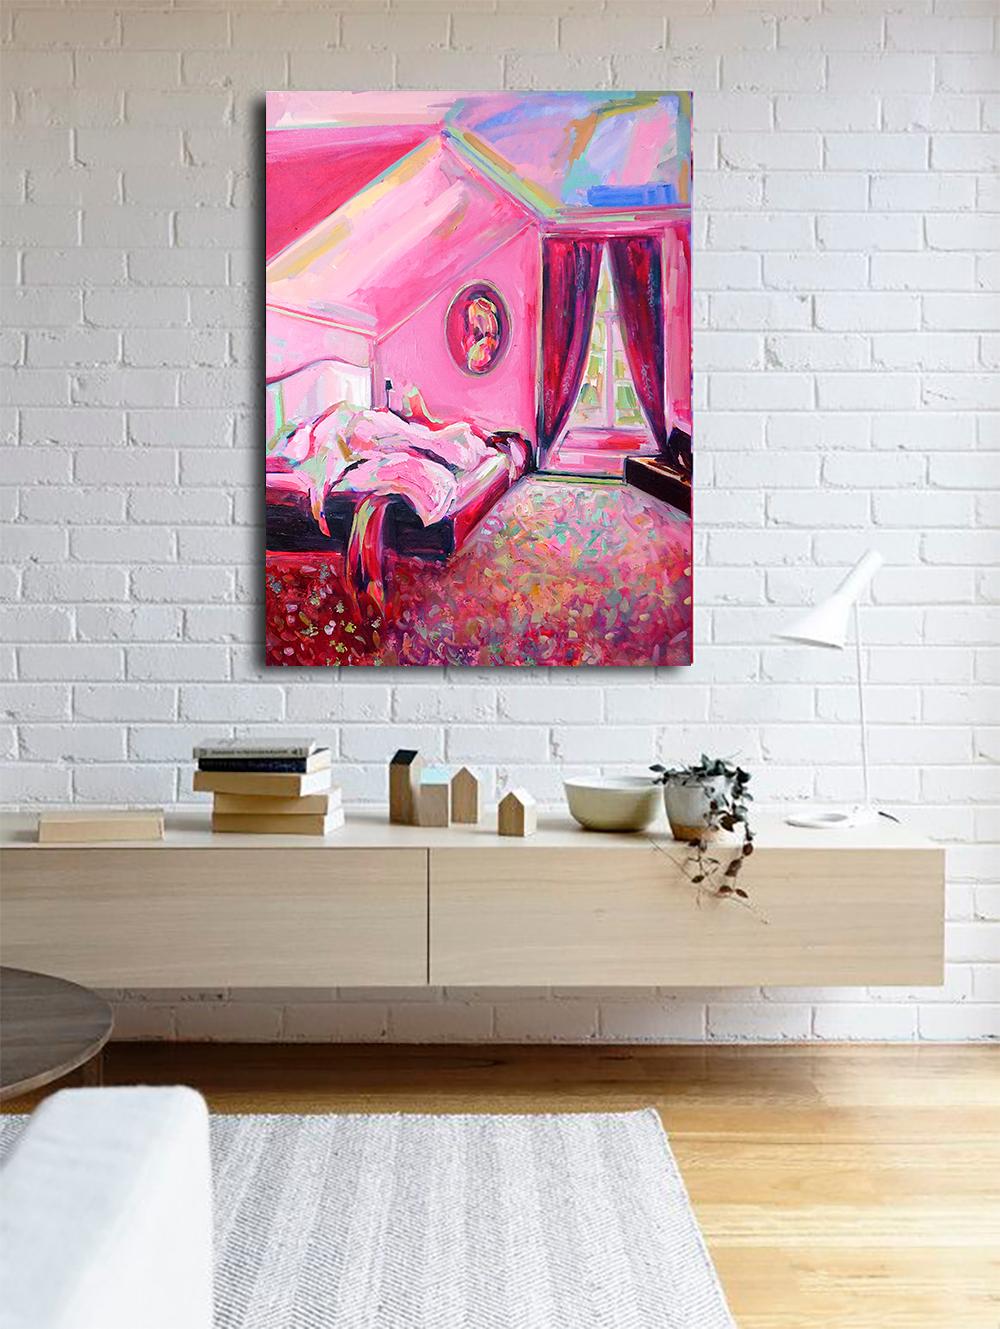 Mademoiselle, Expressive and bright pink oil on canvas, interior boudoir bedroom - Painting by Ekaterina Popova